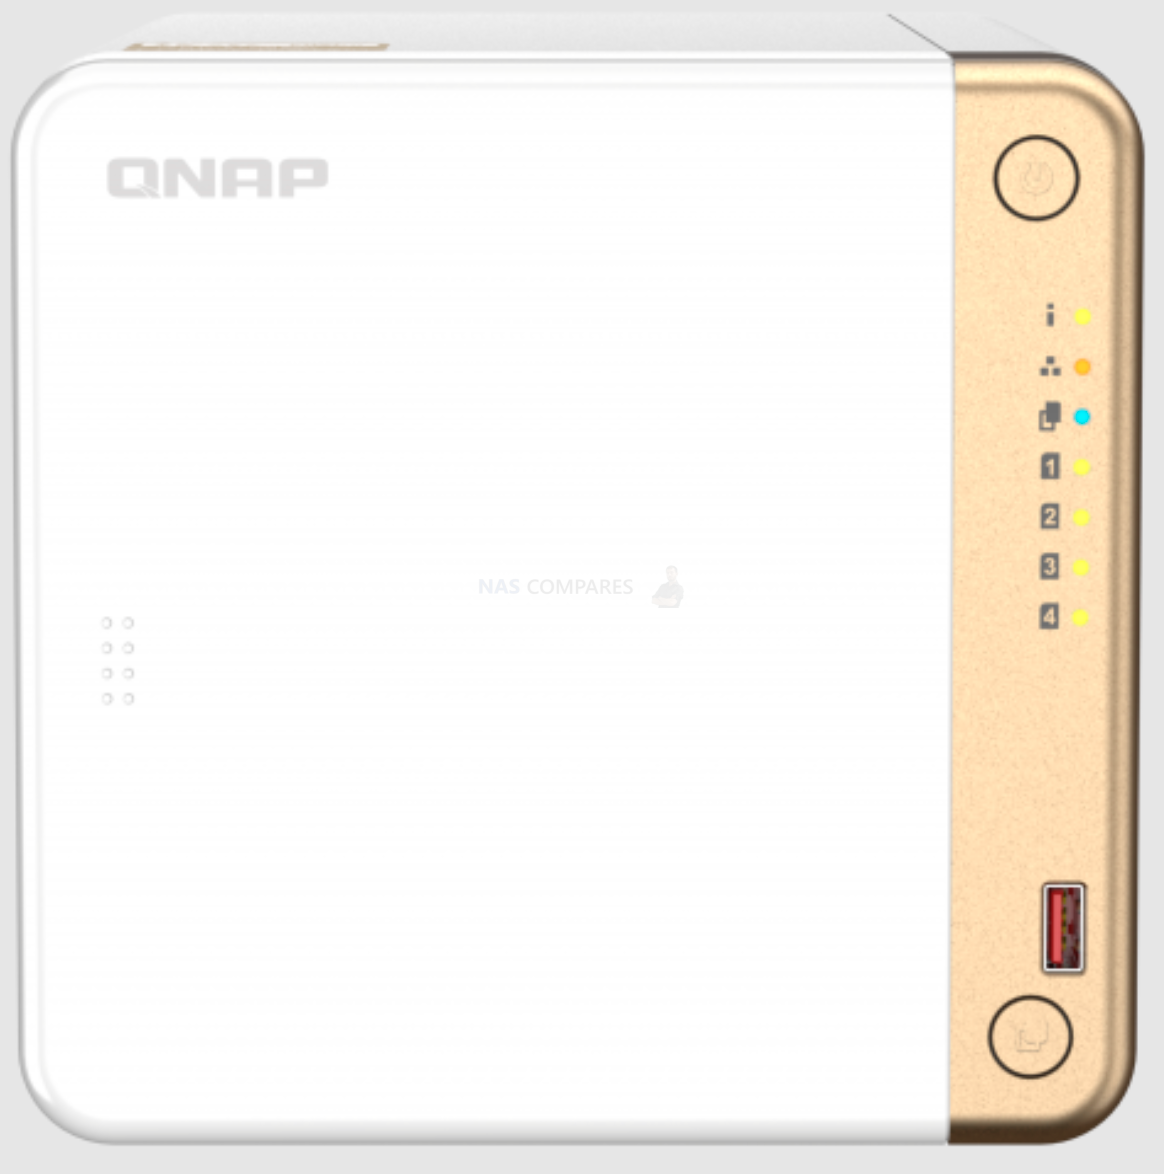 Qnap TS-462 Celeron-based NAS with 2.5GbE LAN and NVME cache